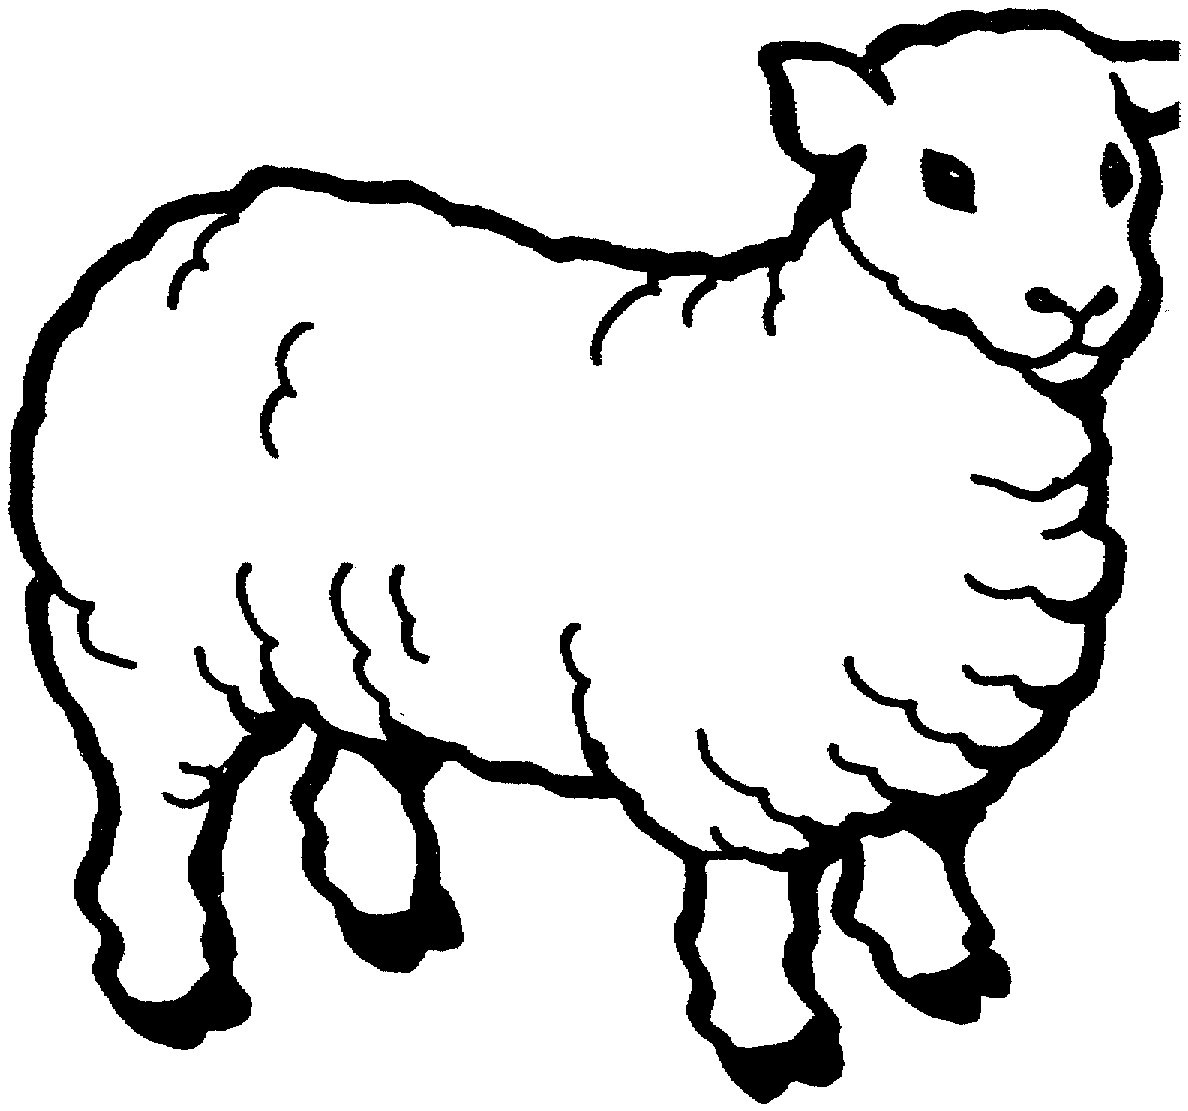 Sheep  black and white sheep clipart black and white free images